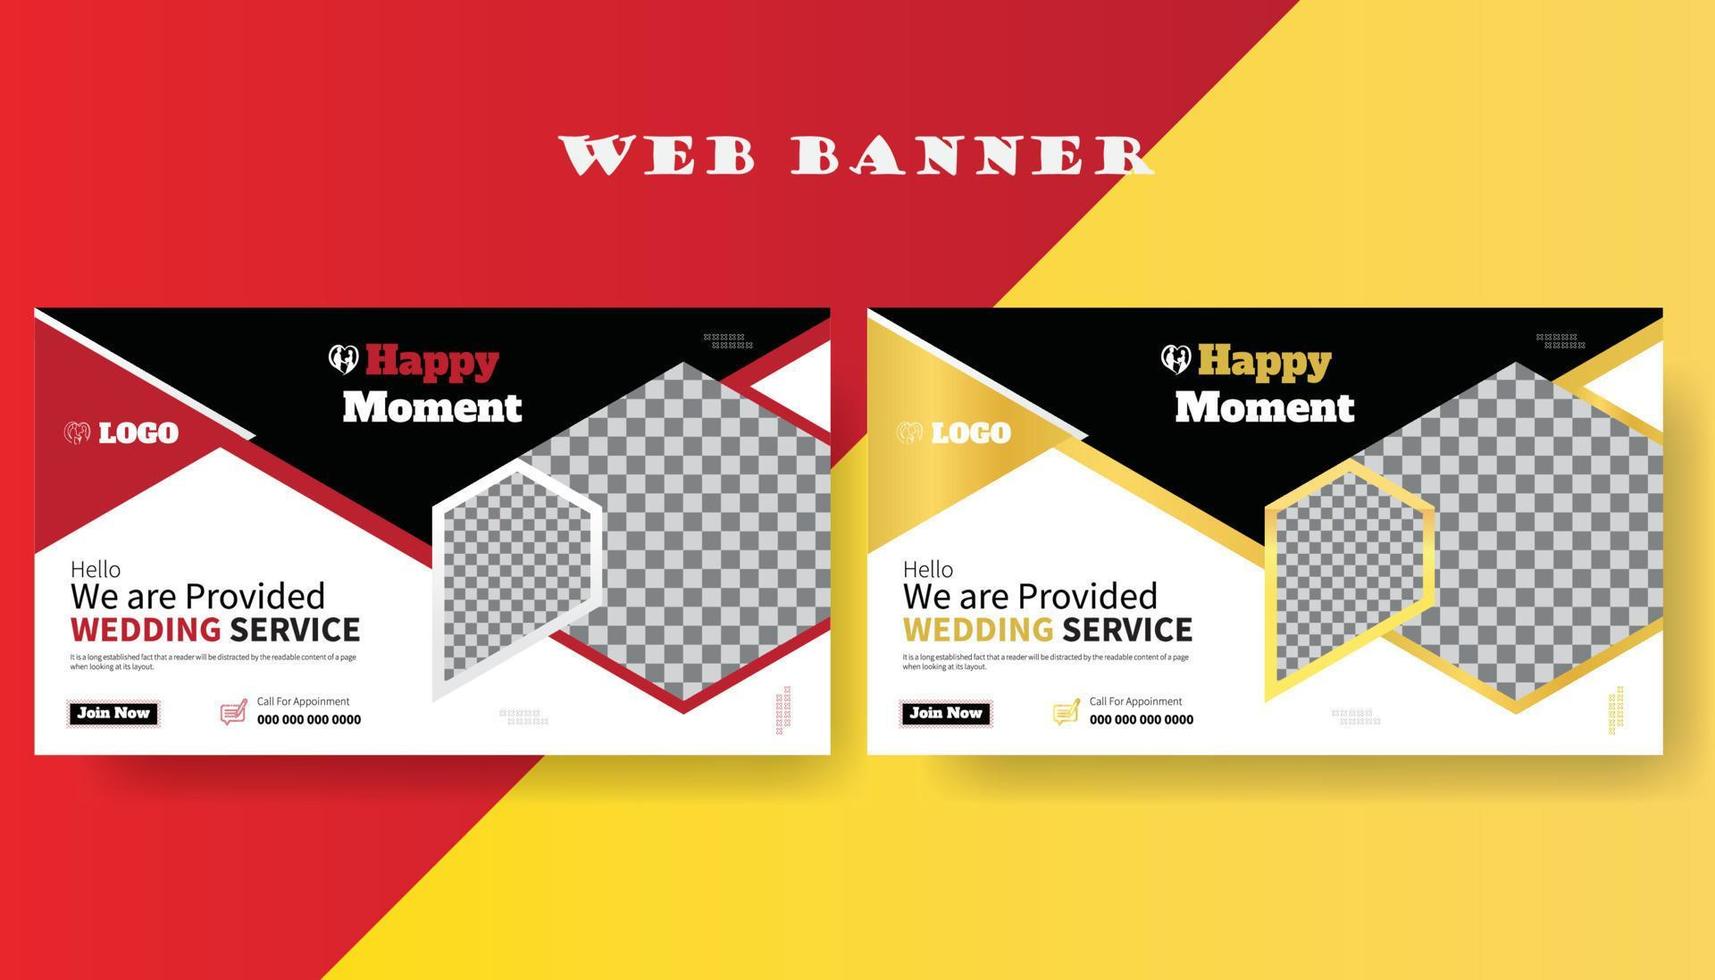 Wedding Service, youtube thumbnail and web banner, Corporate Marketing web  banner for web, horizontal banner template design. Modern banner design  with black and white background and Red frame shape 11635676 Vector Art